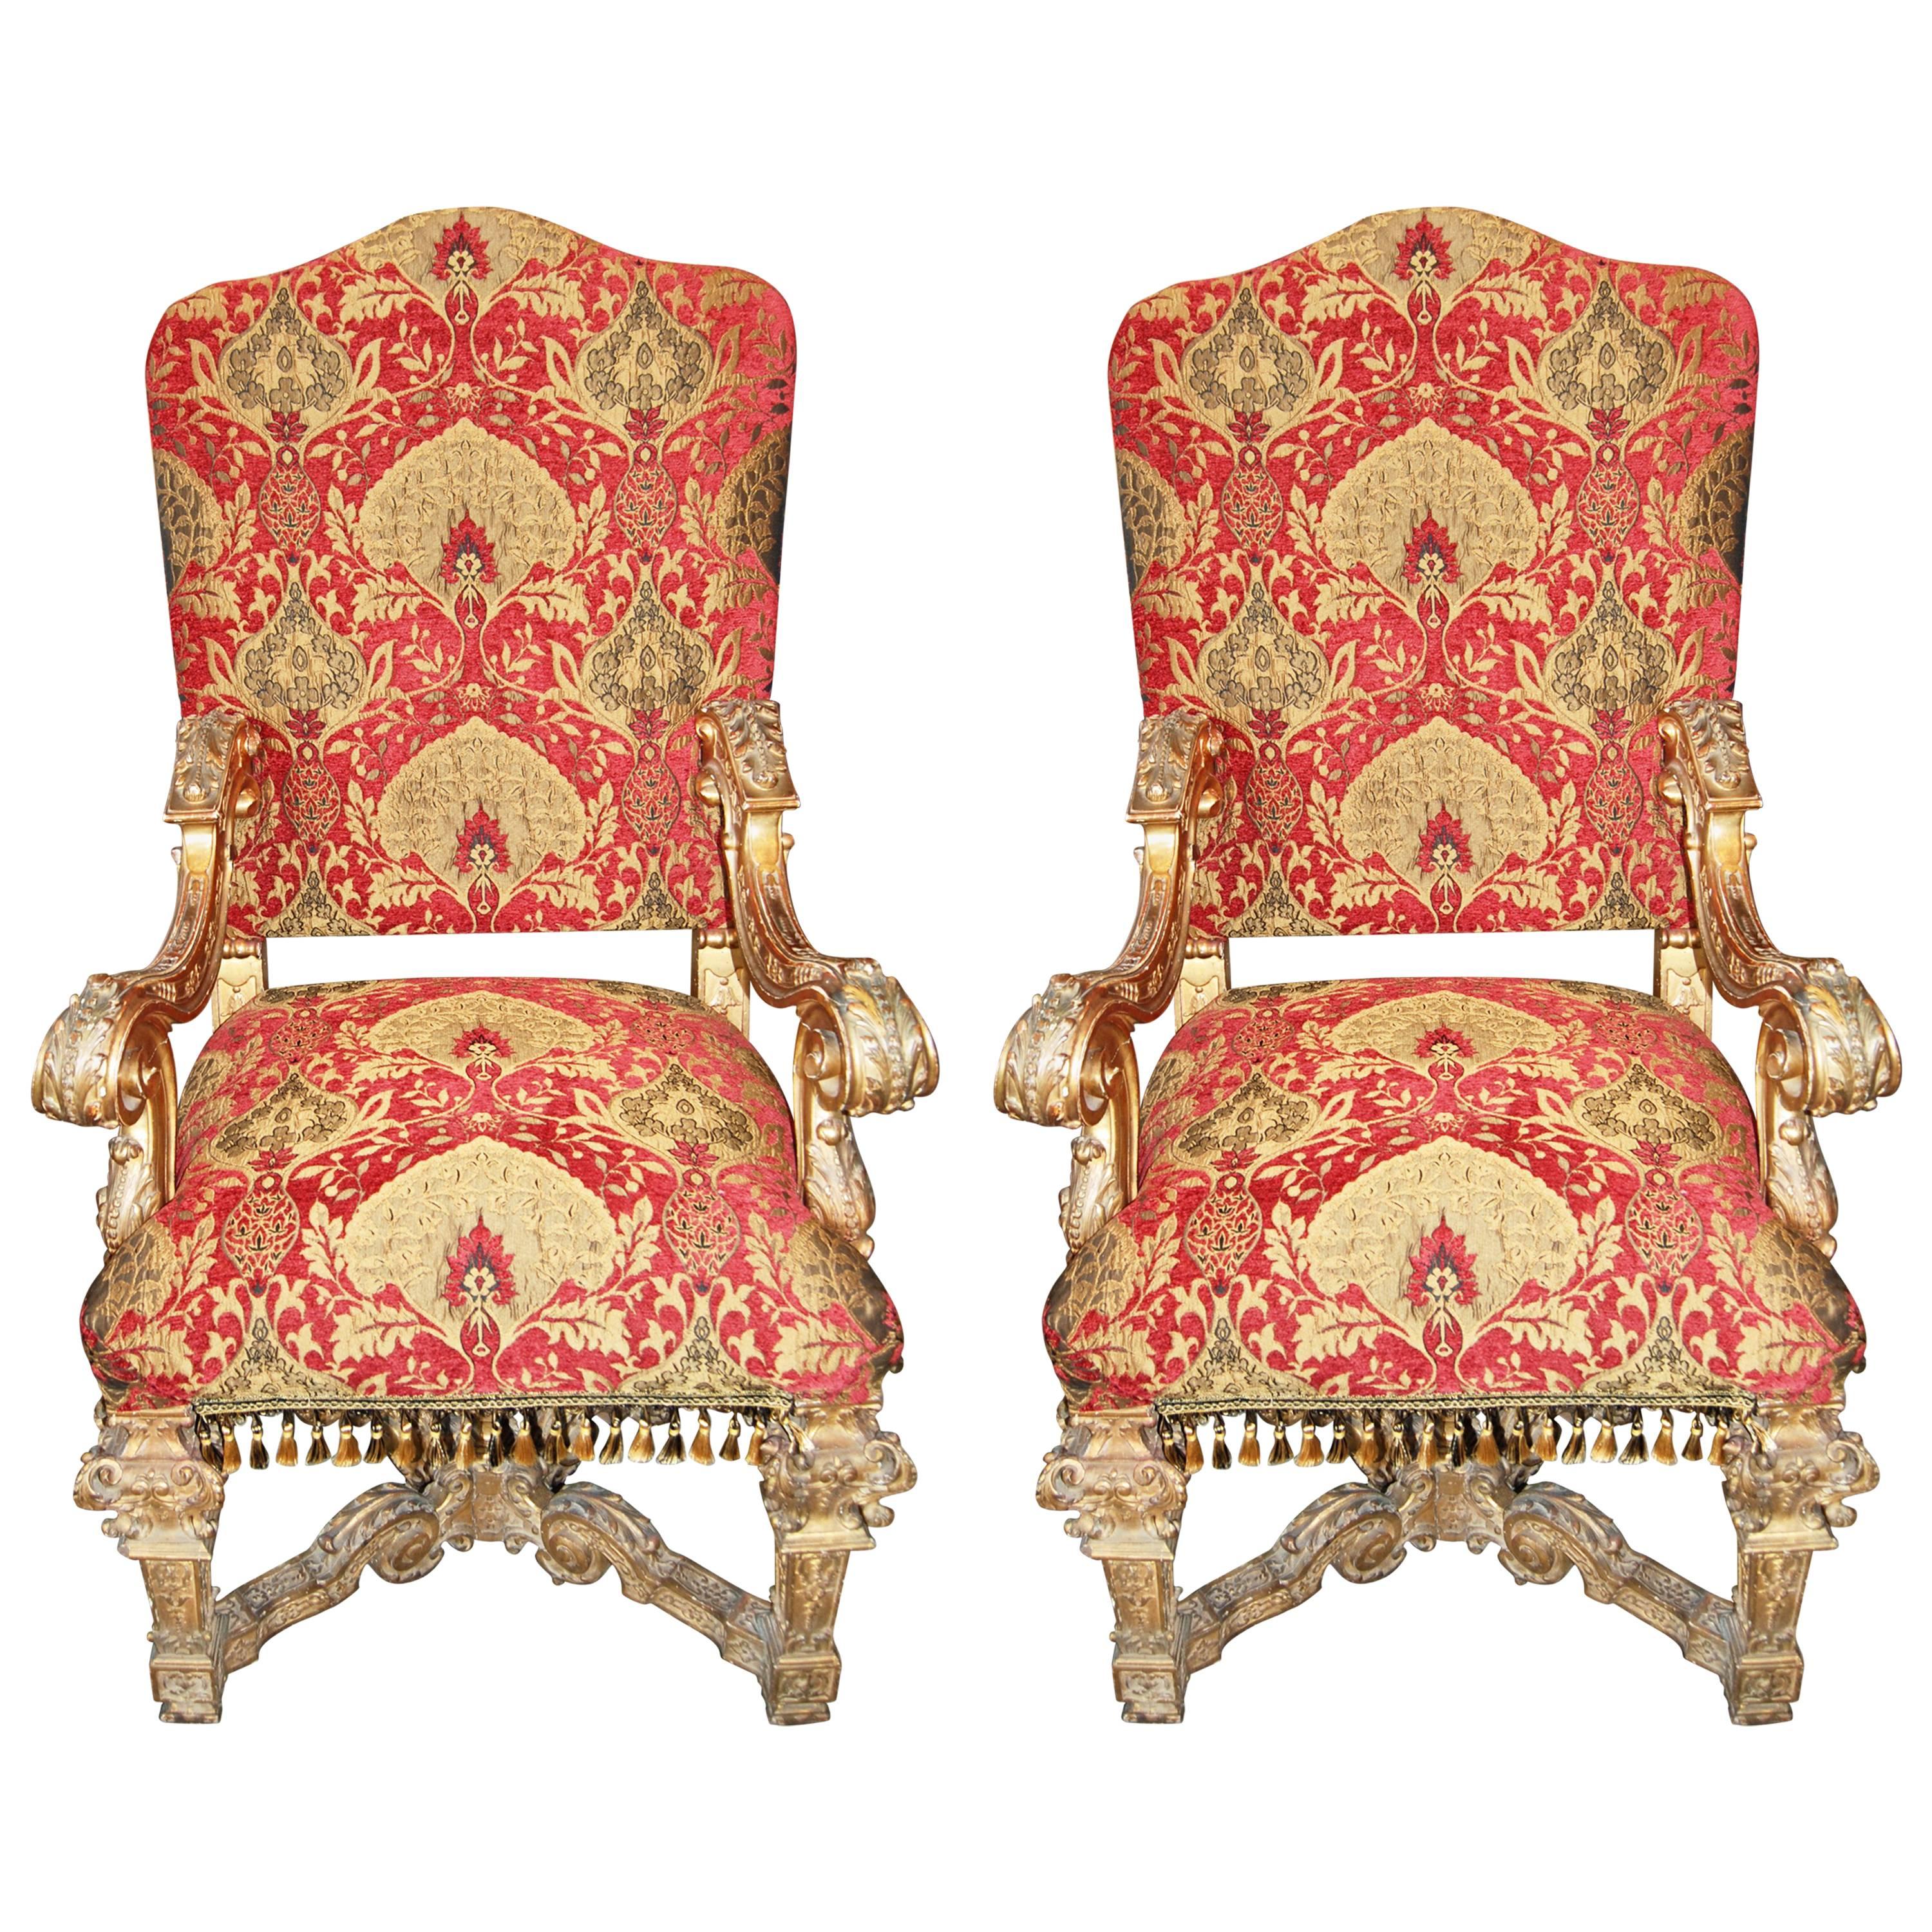 Pair of Louis XIV Carved and Gilded Chairs